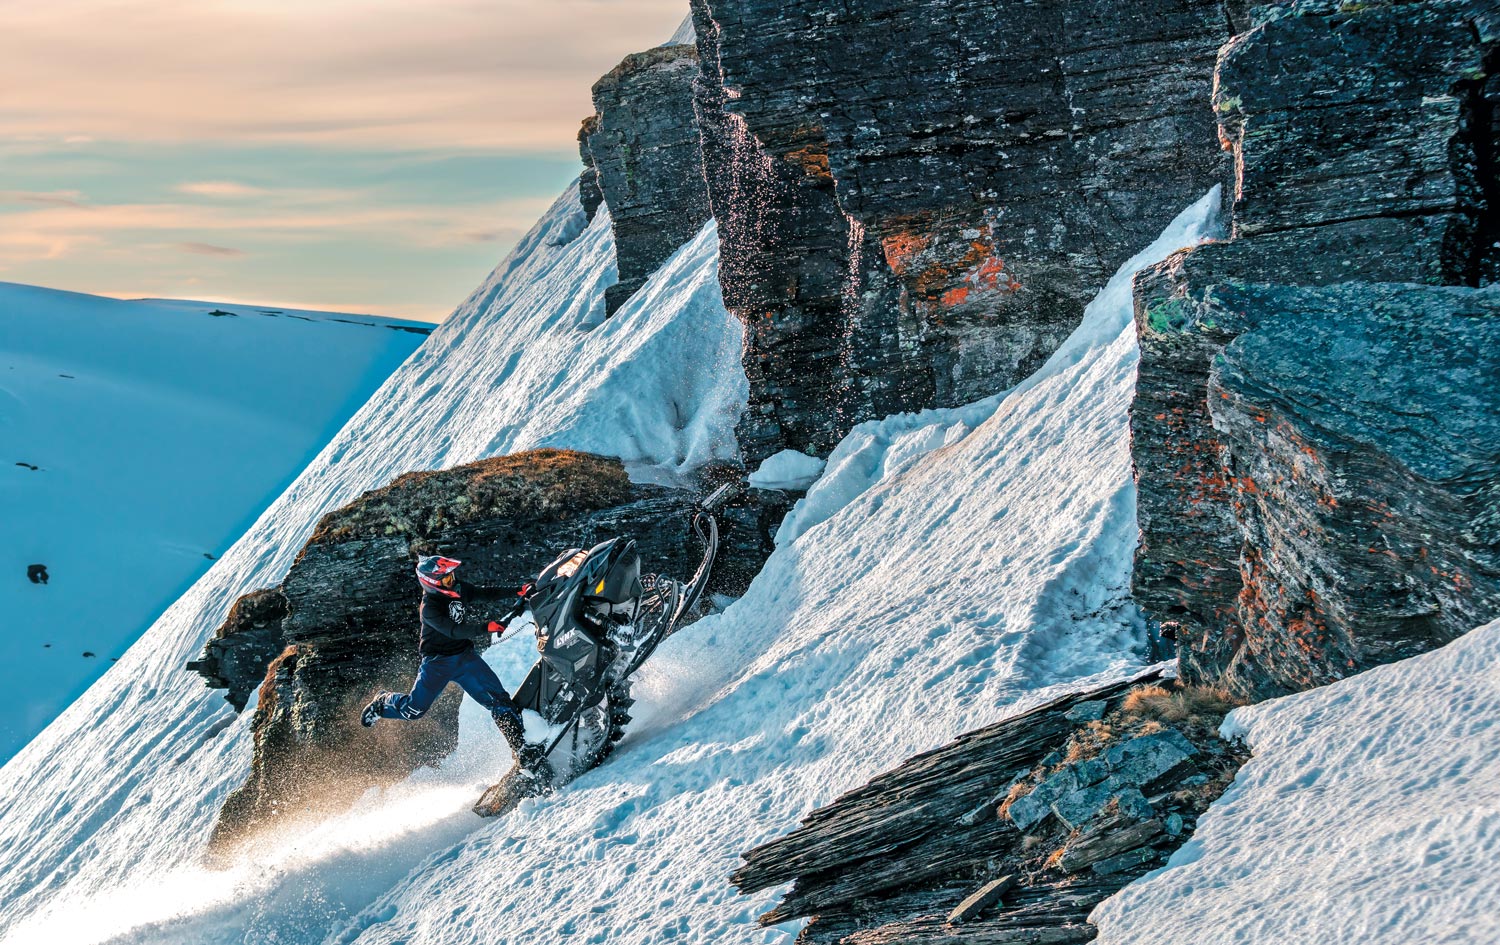 snowmobile rider on the mountain side